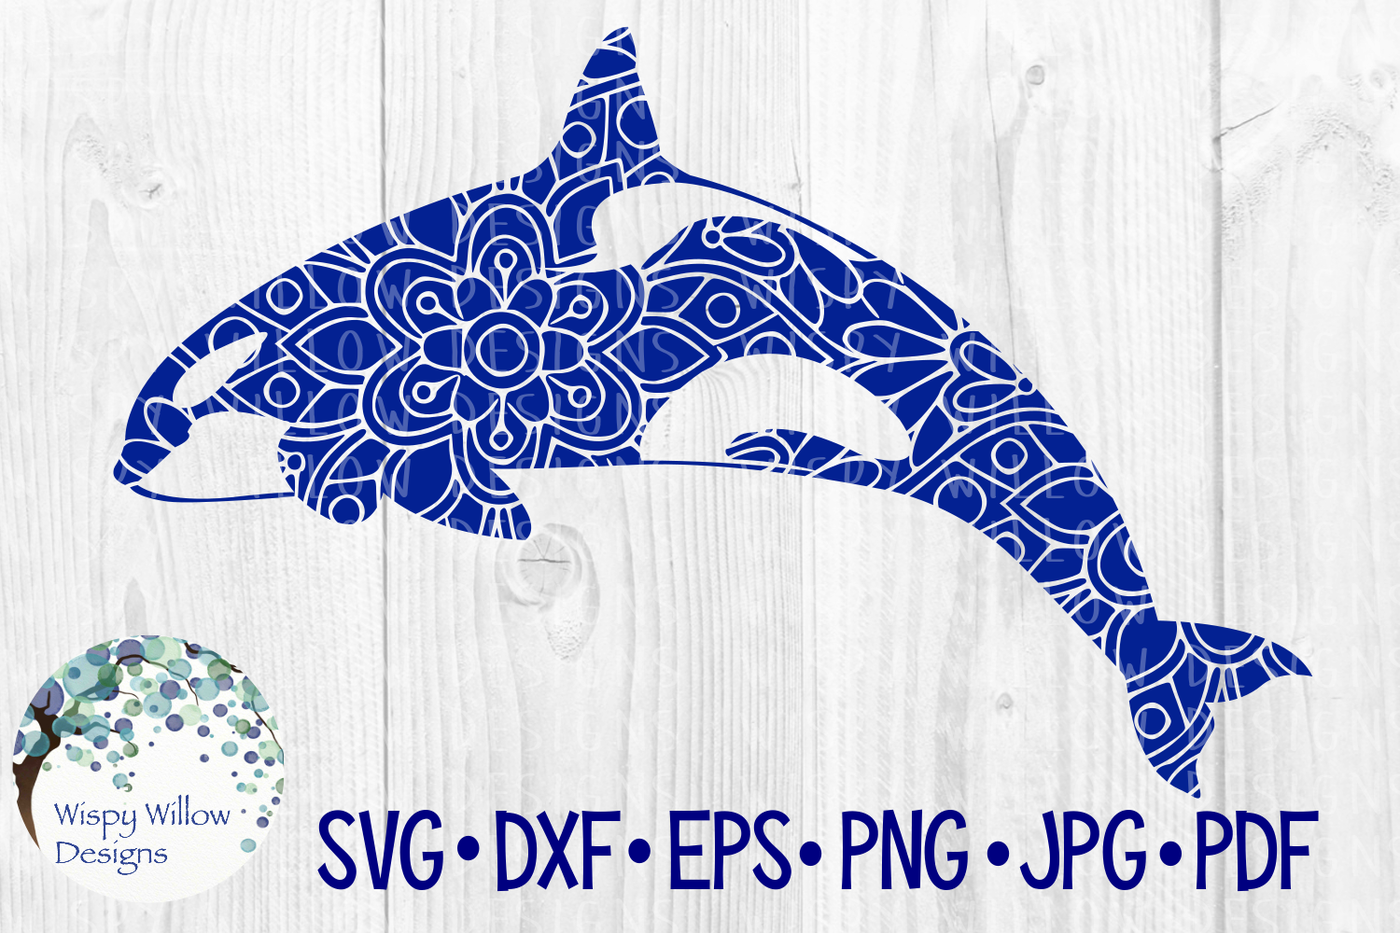 Download Orca, Killer Whale, Floral Mandala SVG/DXF/EPS/PNG/JPG/PDF By Wispy Willow Designs ...